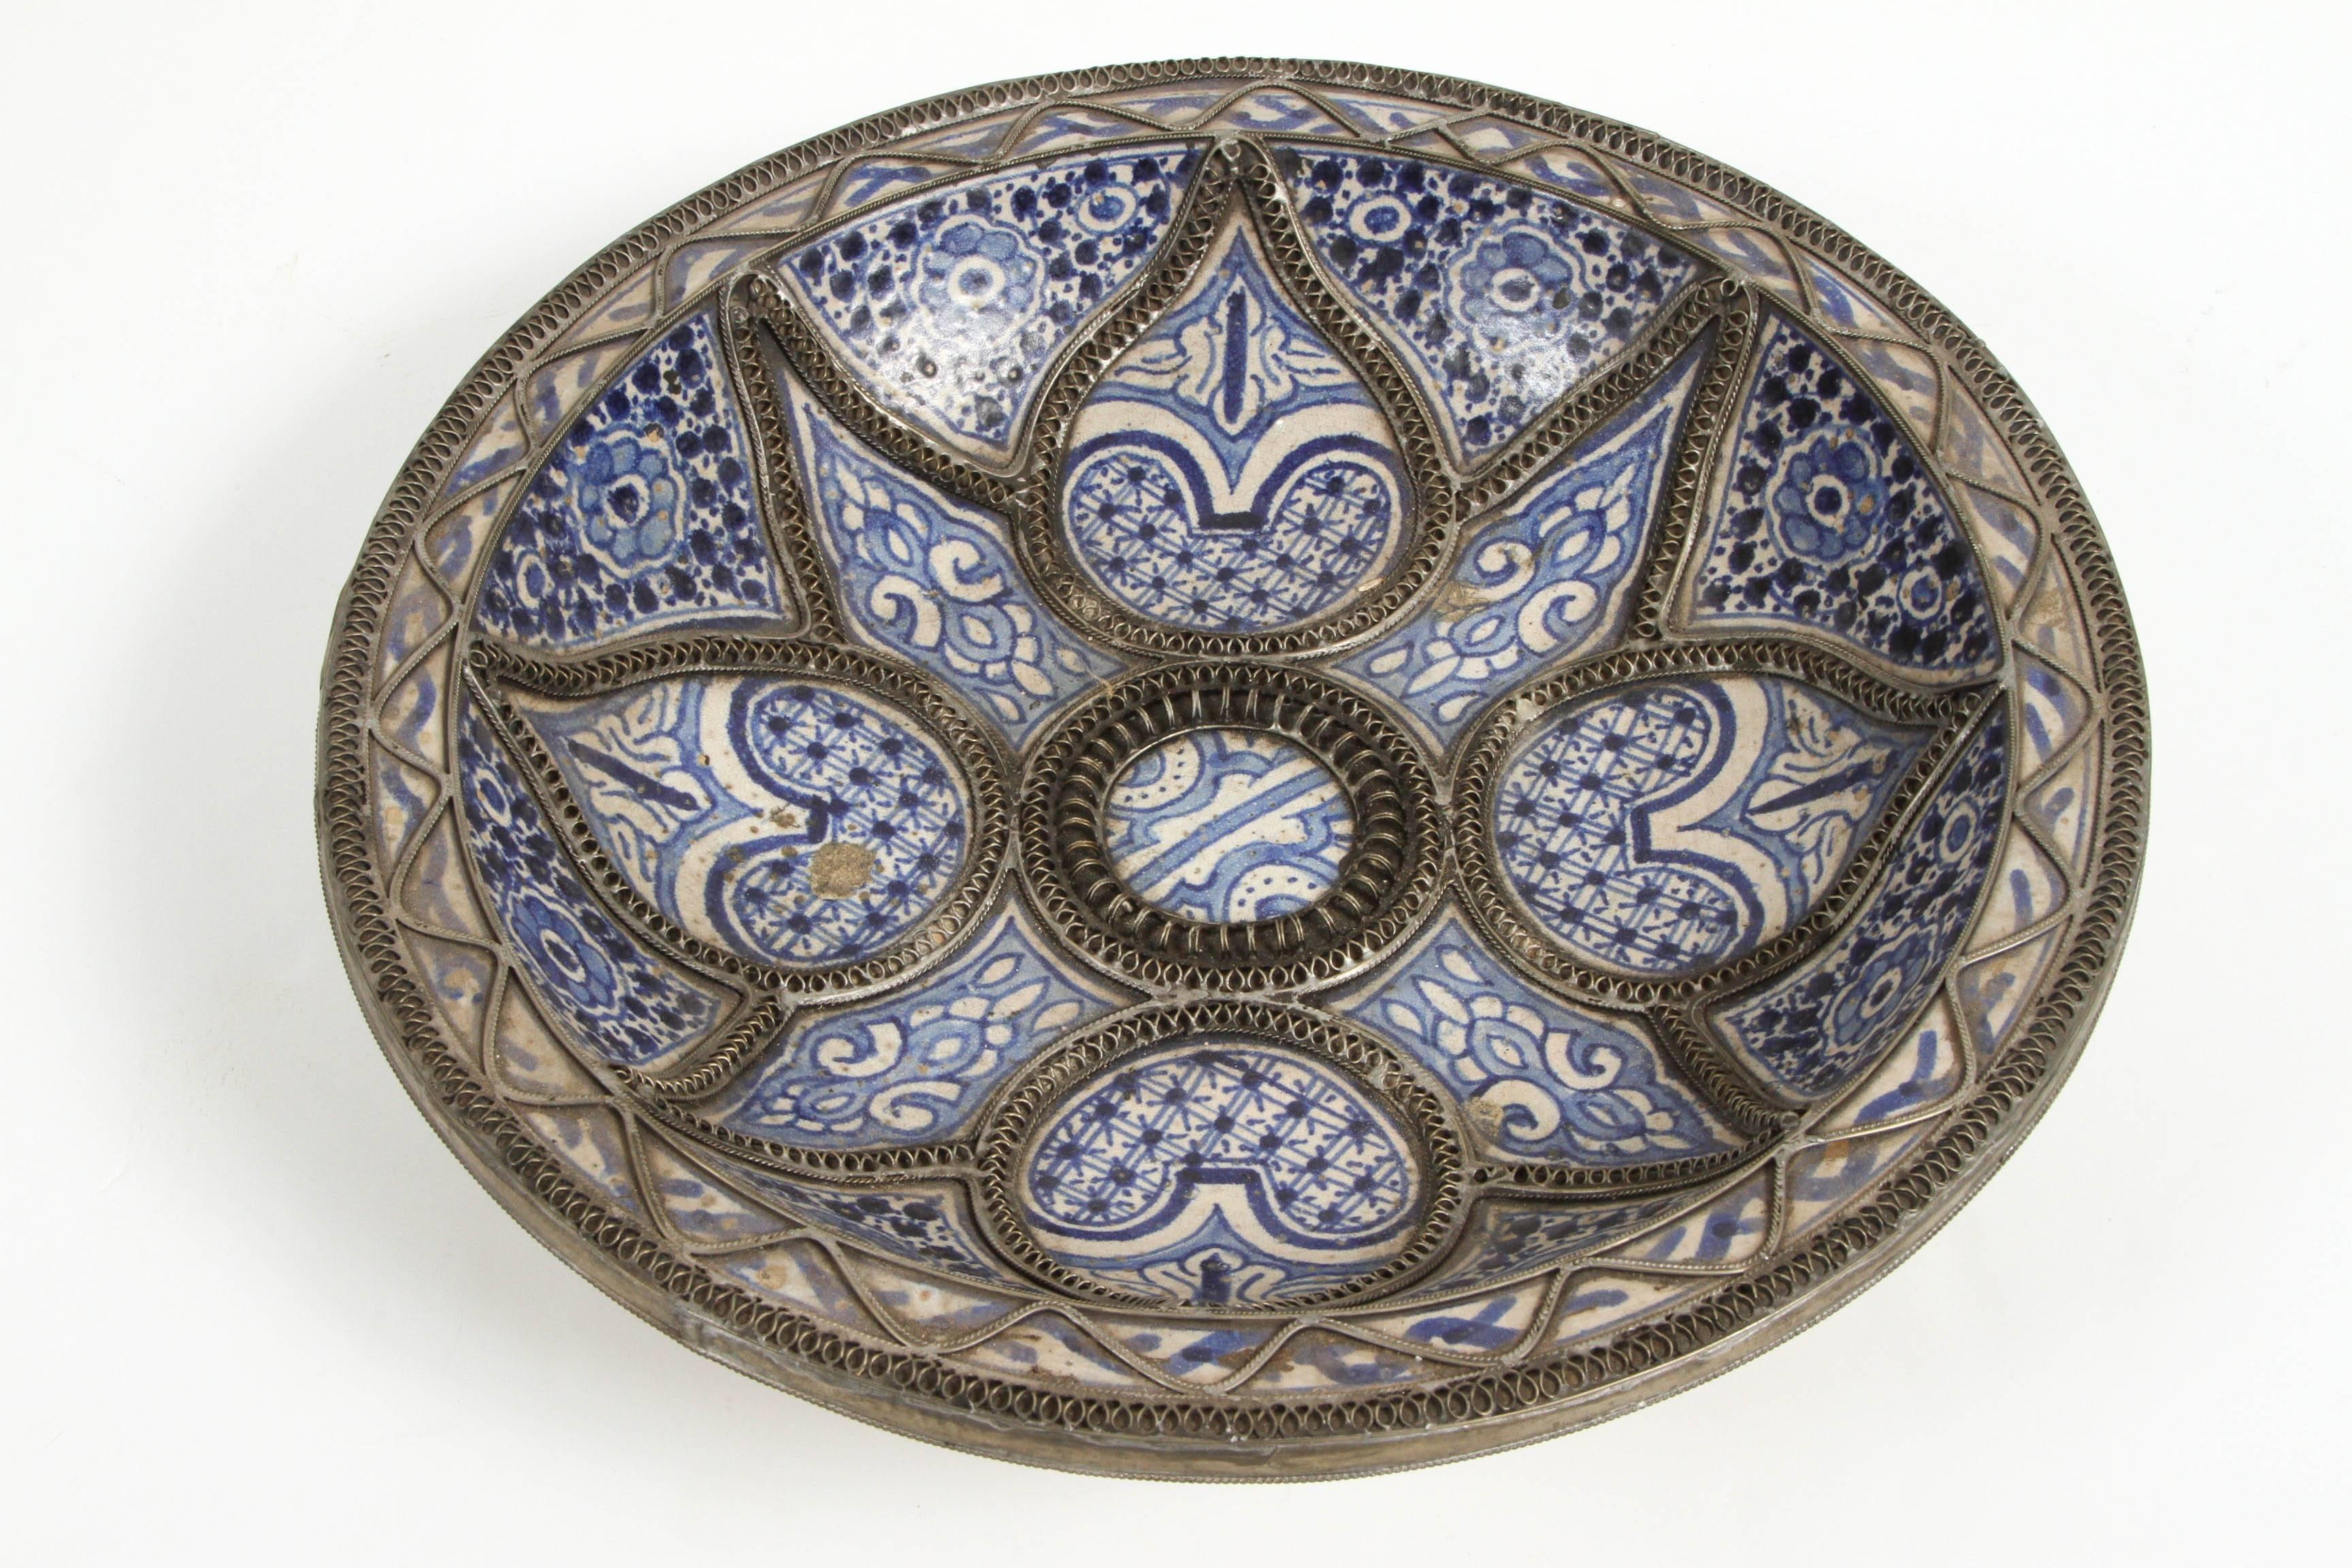 Hand-crafted set of three Moroccan decorative ceramic plates from Fez, Morocco..
Hand-painted in polychrome and Bleu de Fez colors, very nice designs. hand-made by artist in Fez with geometrical and floral designs and adorned with nickel silver